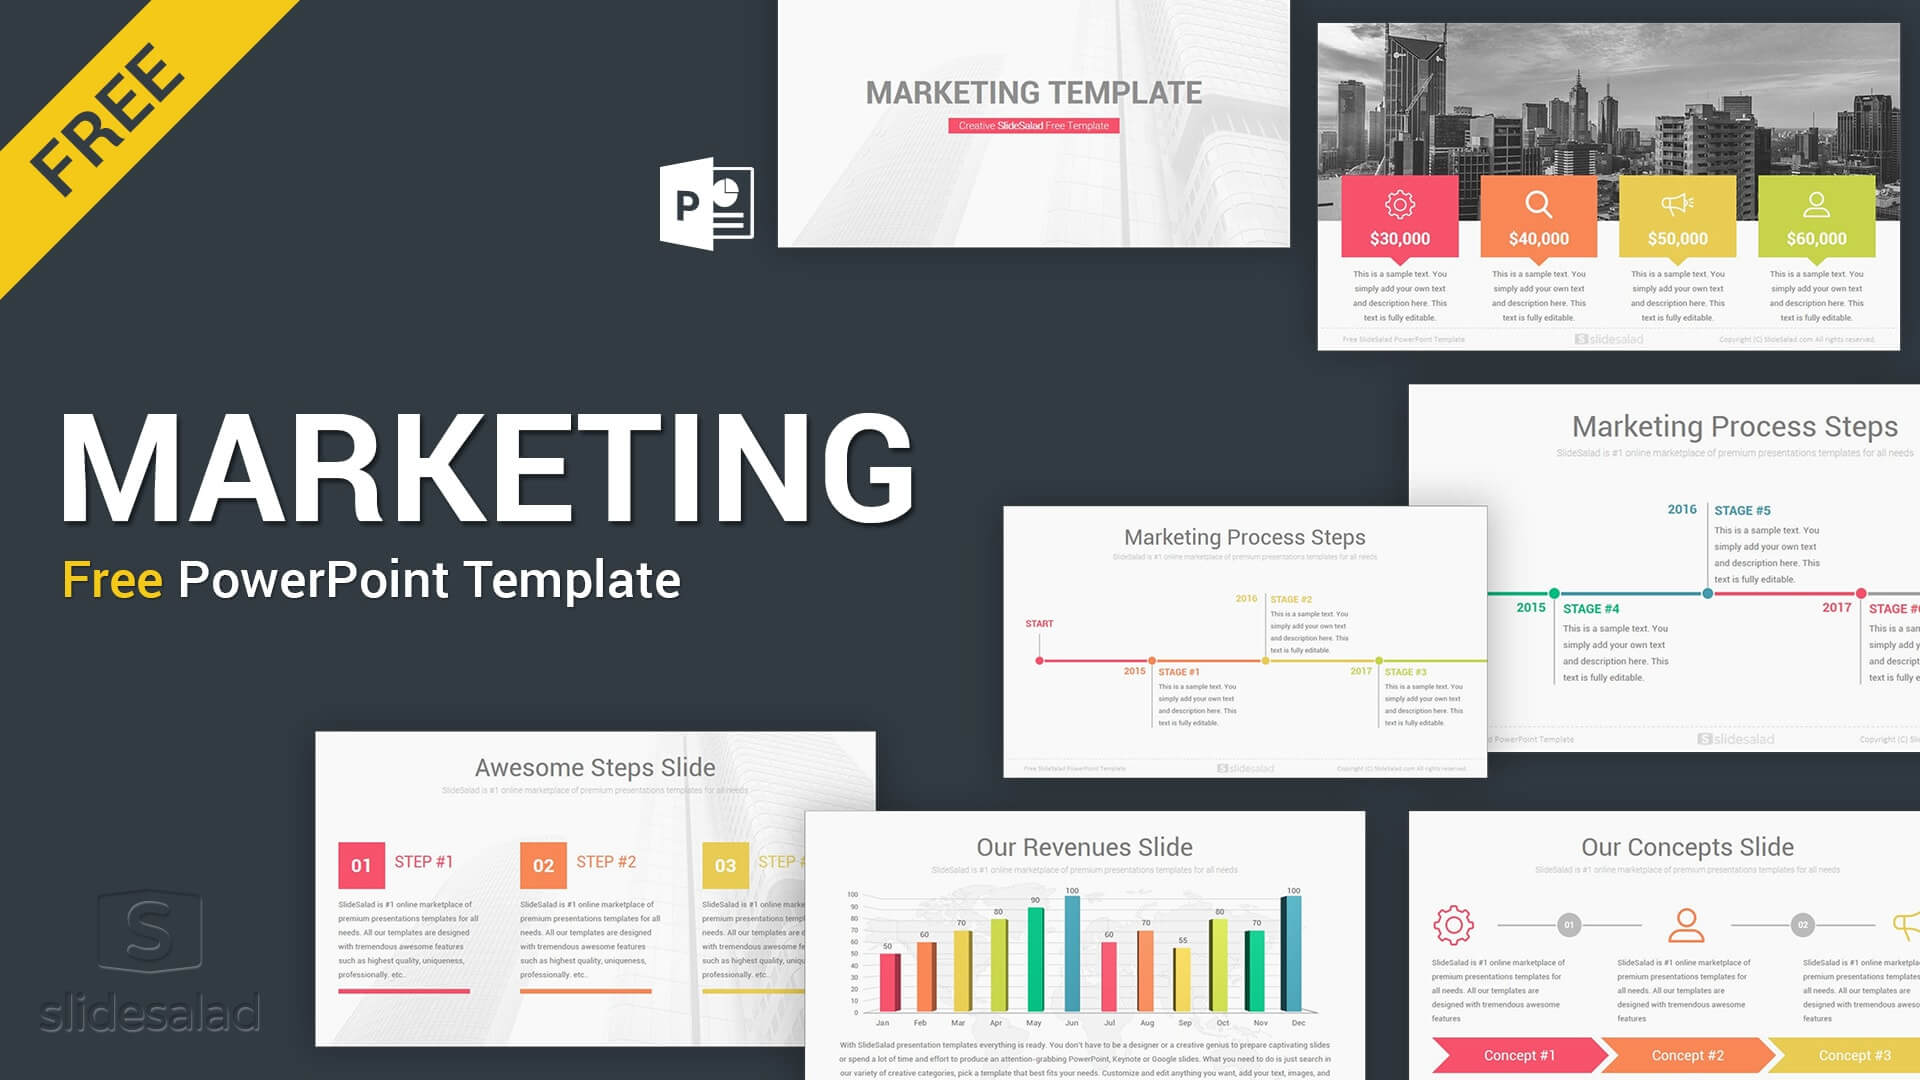 Marketing Free Download Powerpoint Template Slides – Slidesalad Inside Powerpoint Sample Templates Free Download